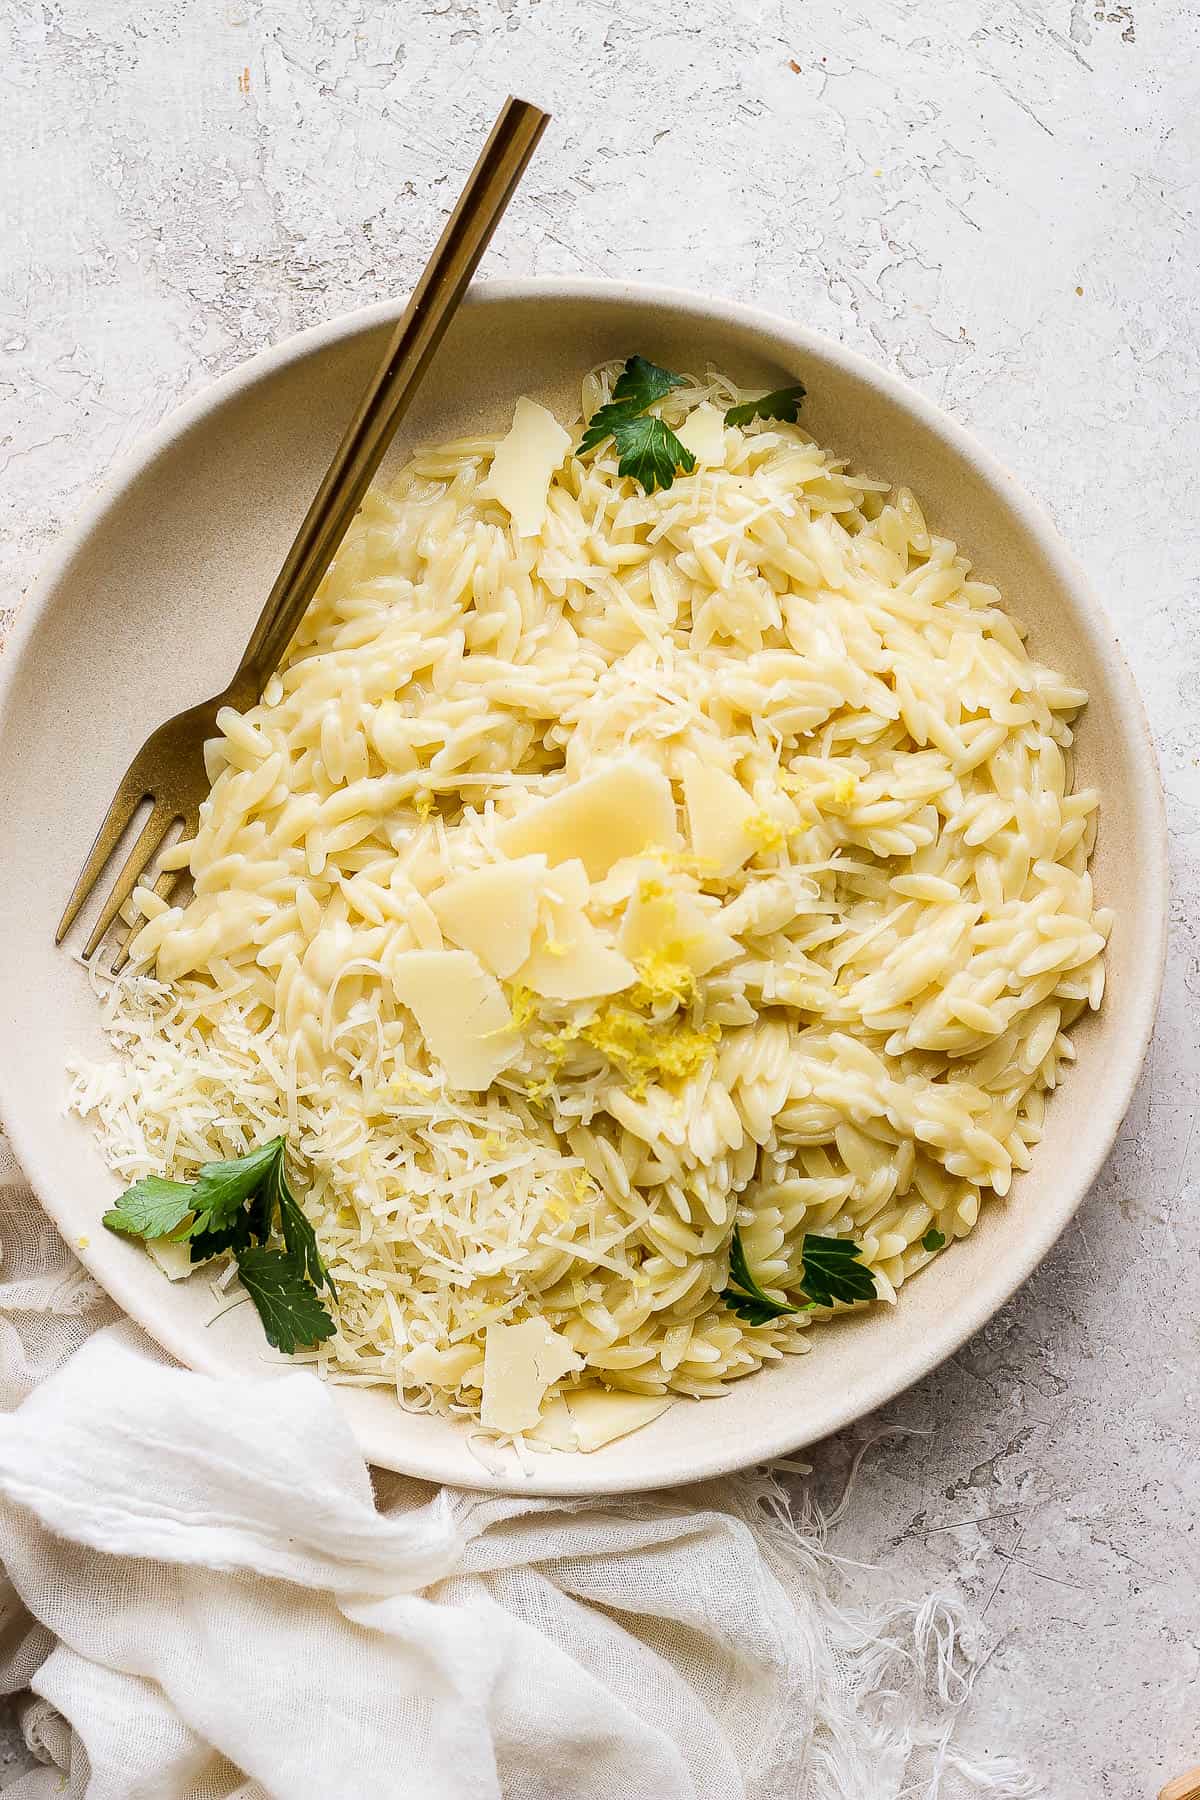 Parmesan orzo on a plate topped with parmesan cheese, lemon zest, and garnished with parsley.